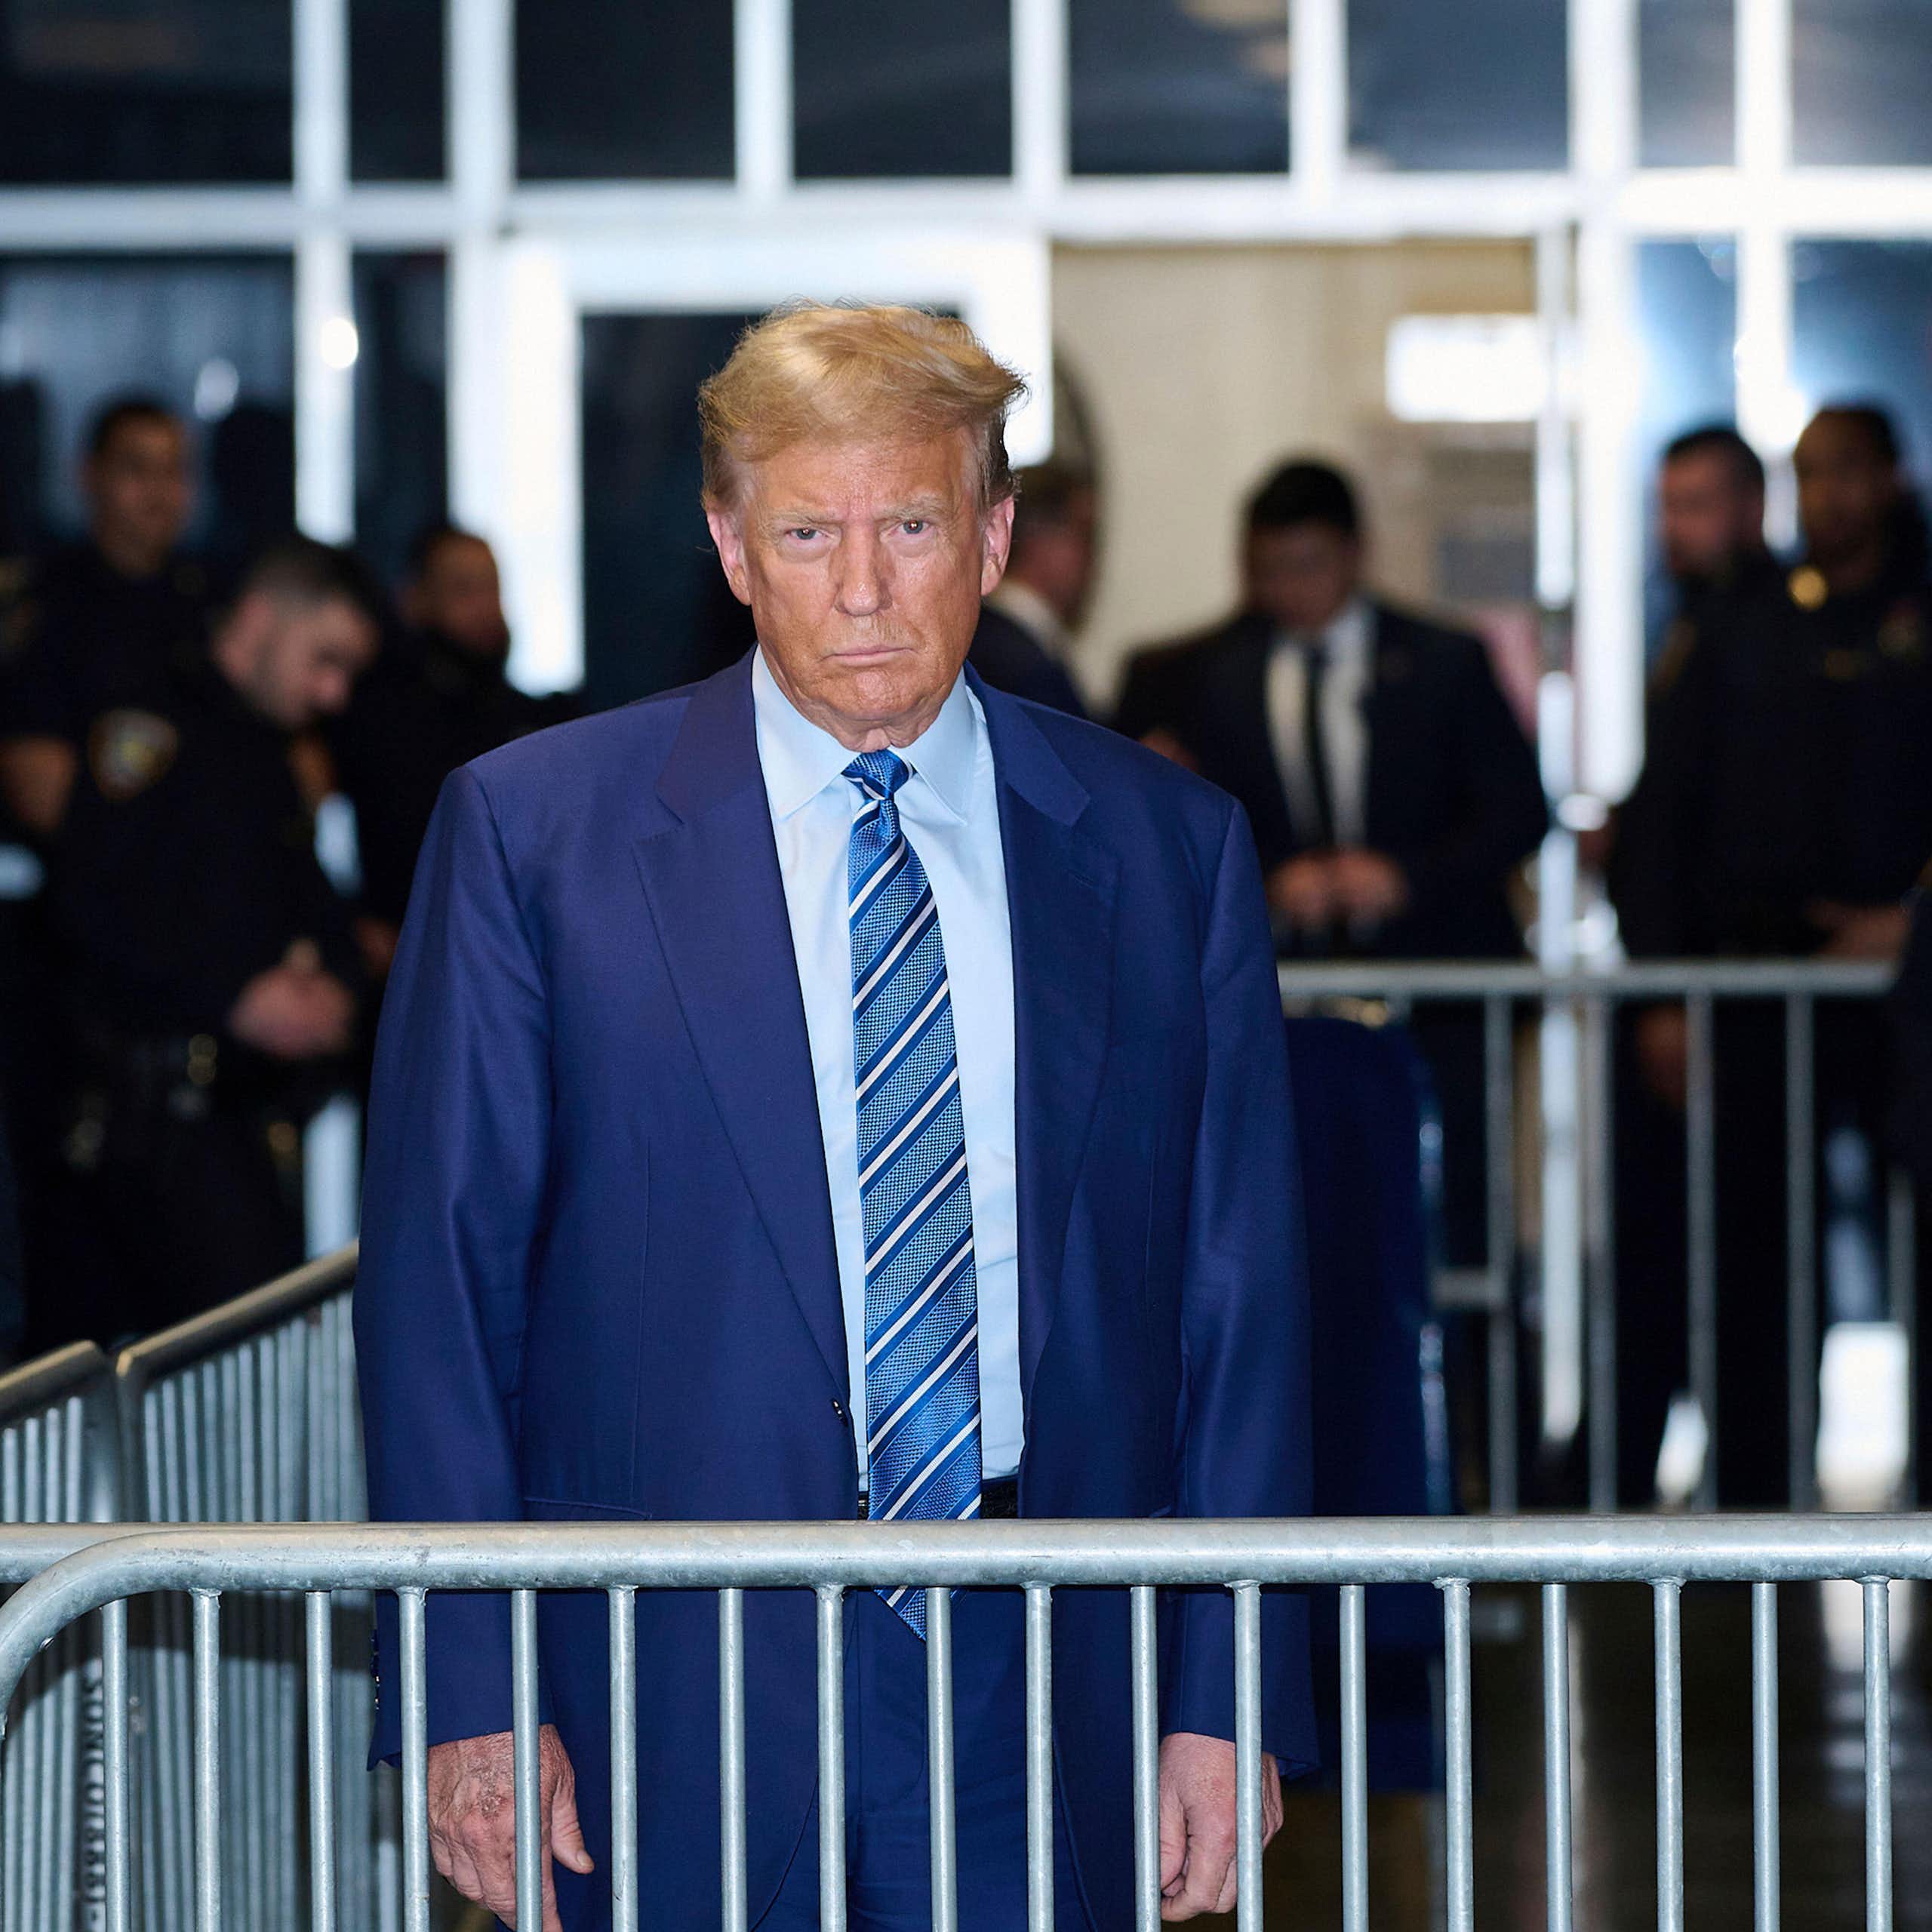 Donald Trump in a blue suit near to a court.